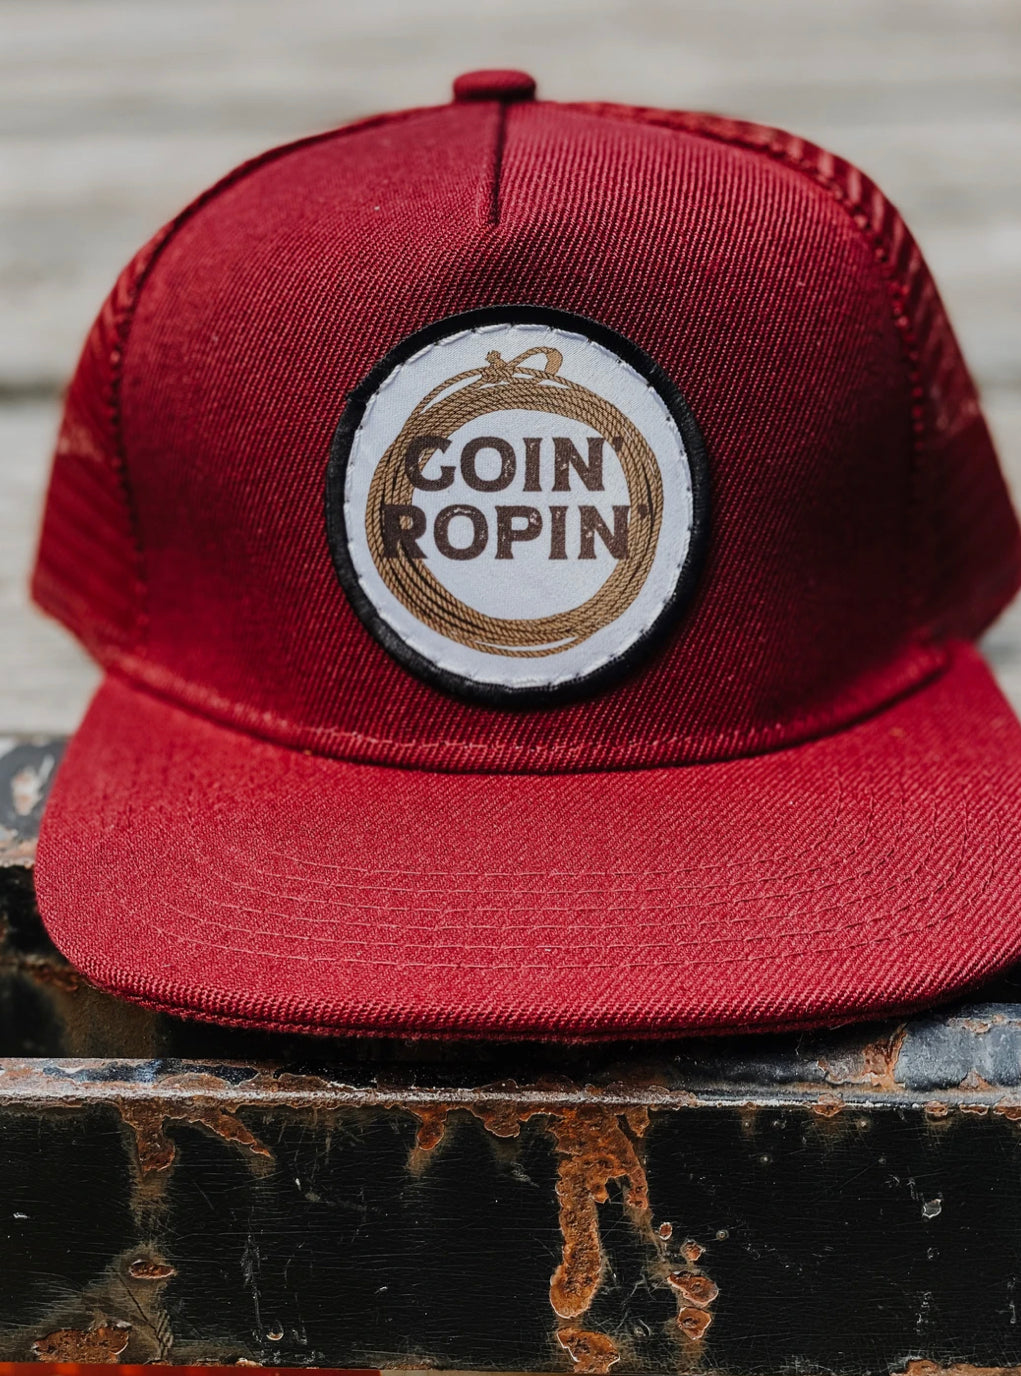 Goin Ropin Printed Leather Patch Cap - Forever Western Boutique